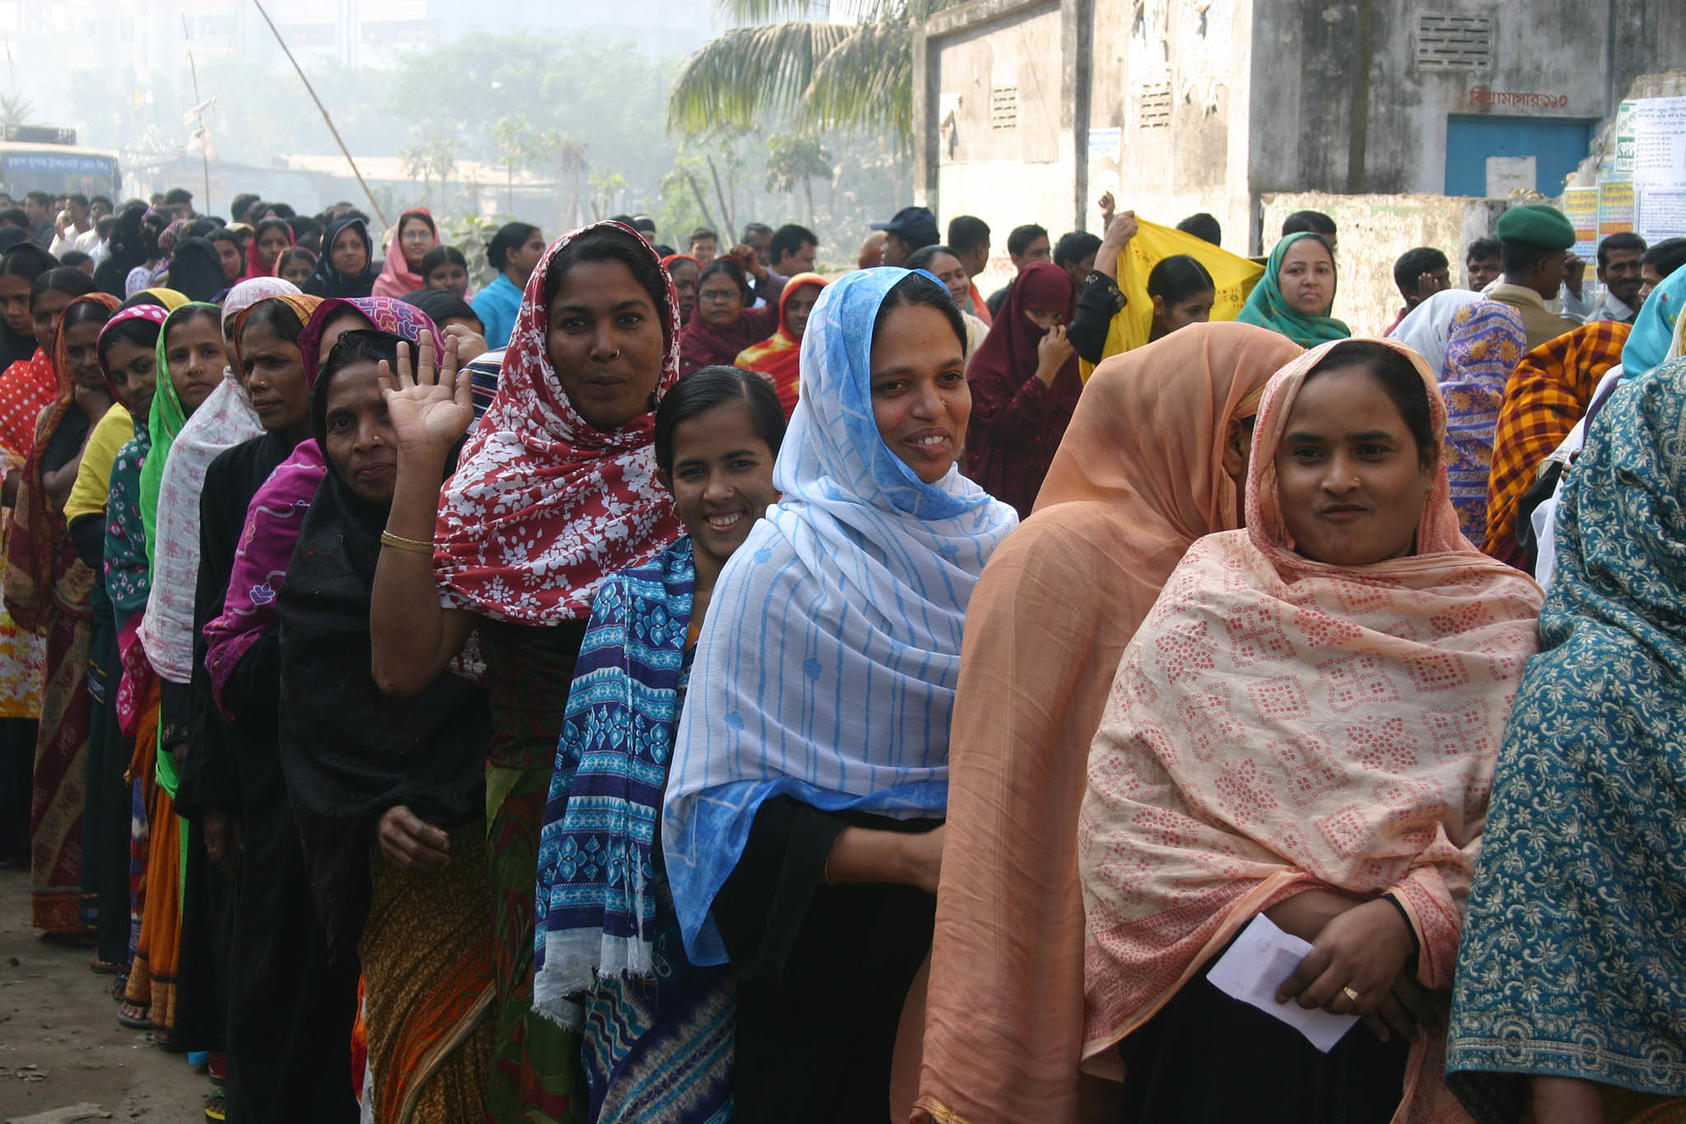 Women queue up to vote during the parliamentary elections in Bangladesh on December 29, 2008. Those were the last elections in Bangladesh that were widely viewed as legitimate. (Commonwealth Secretariat)